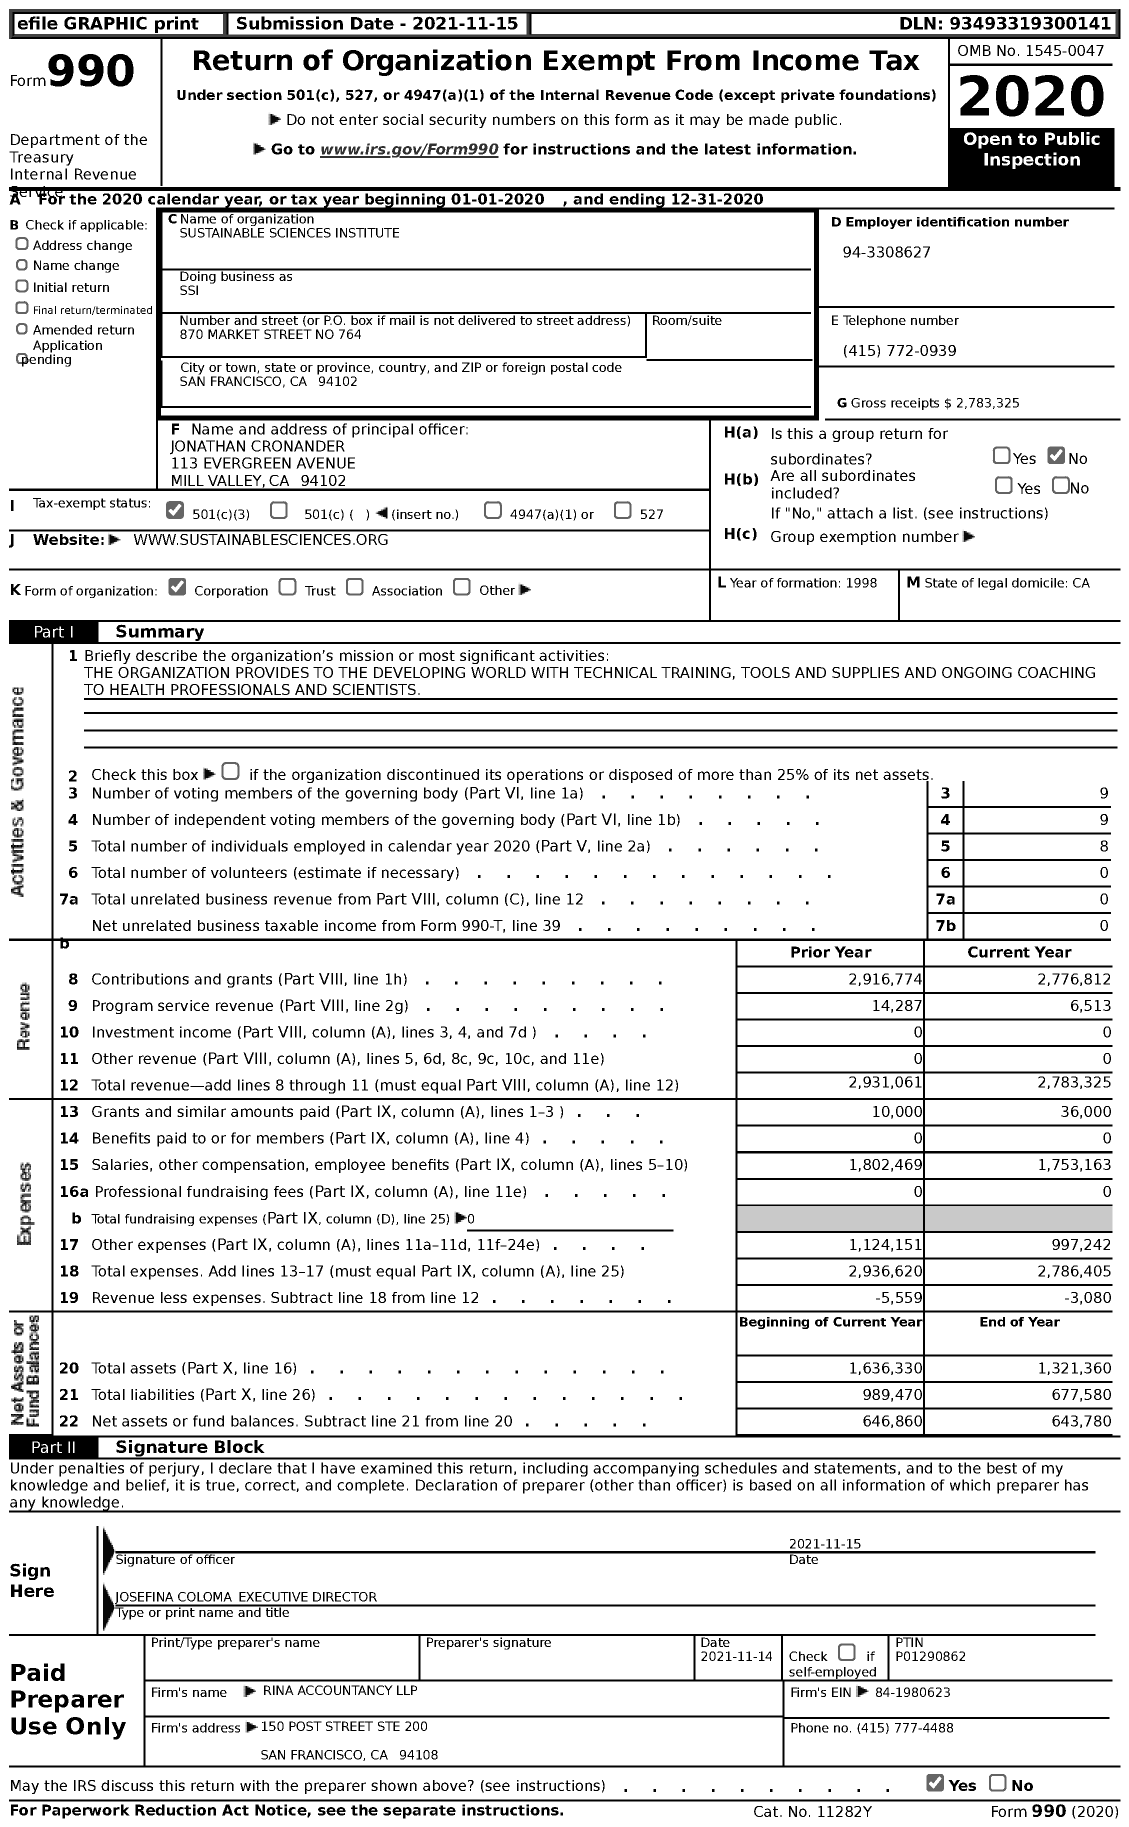 Image of first page of 2020 Form 990 for Sustainable Sciences Institute (SSI)